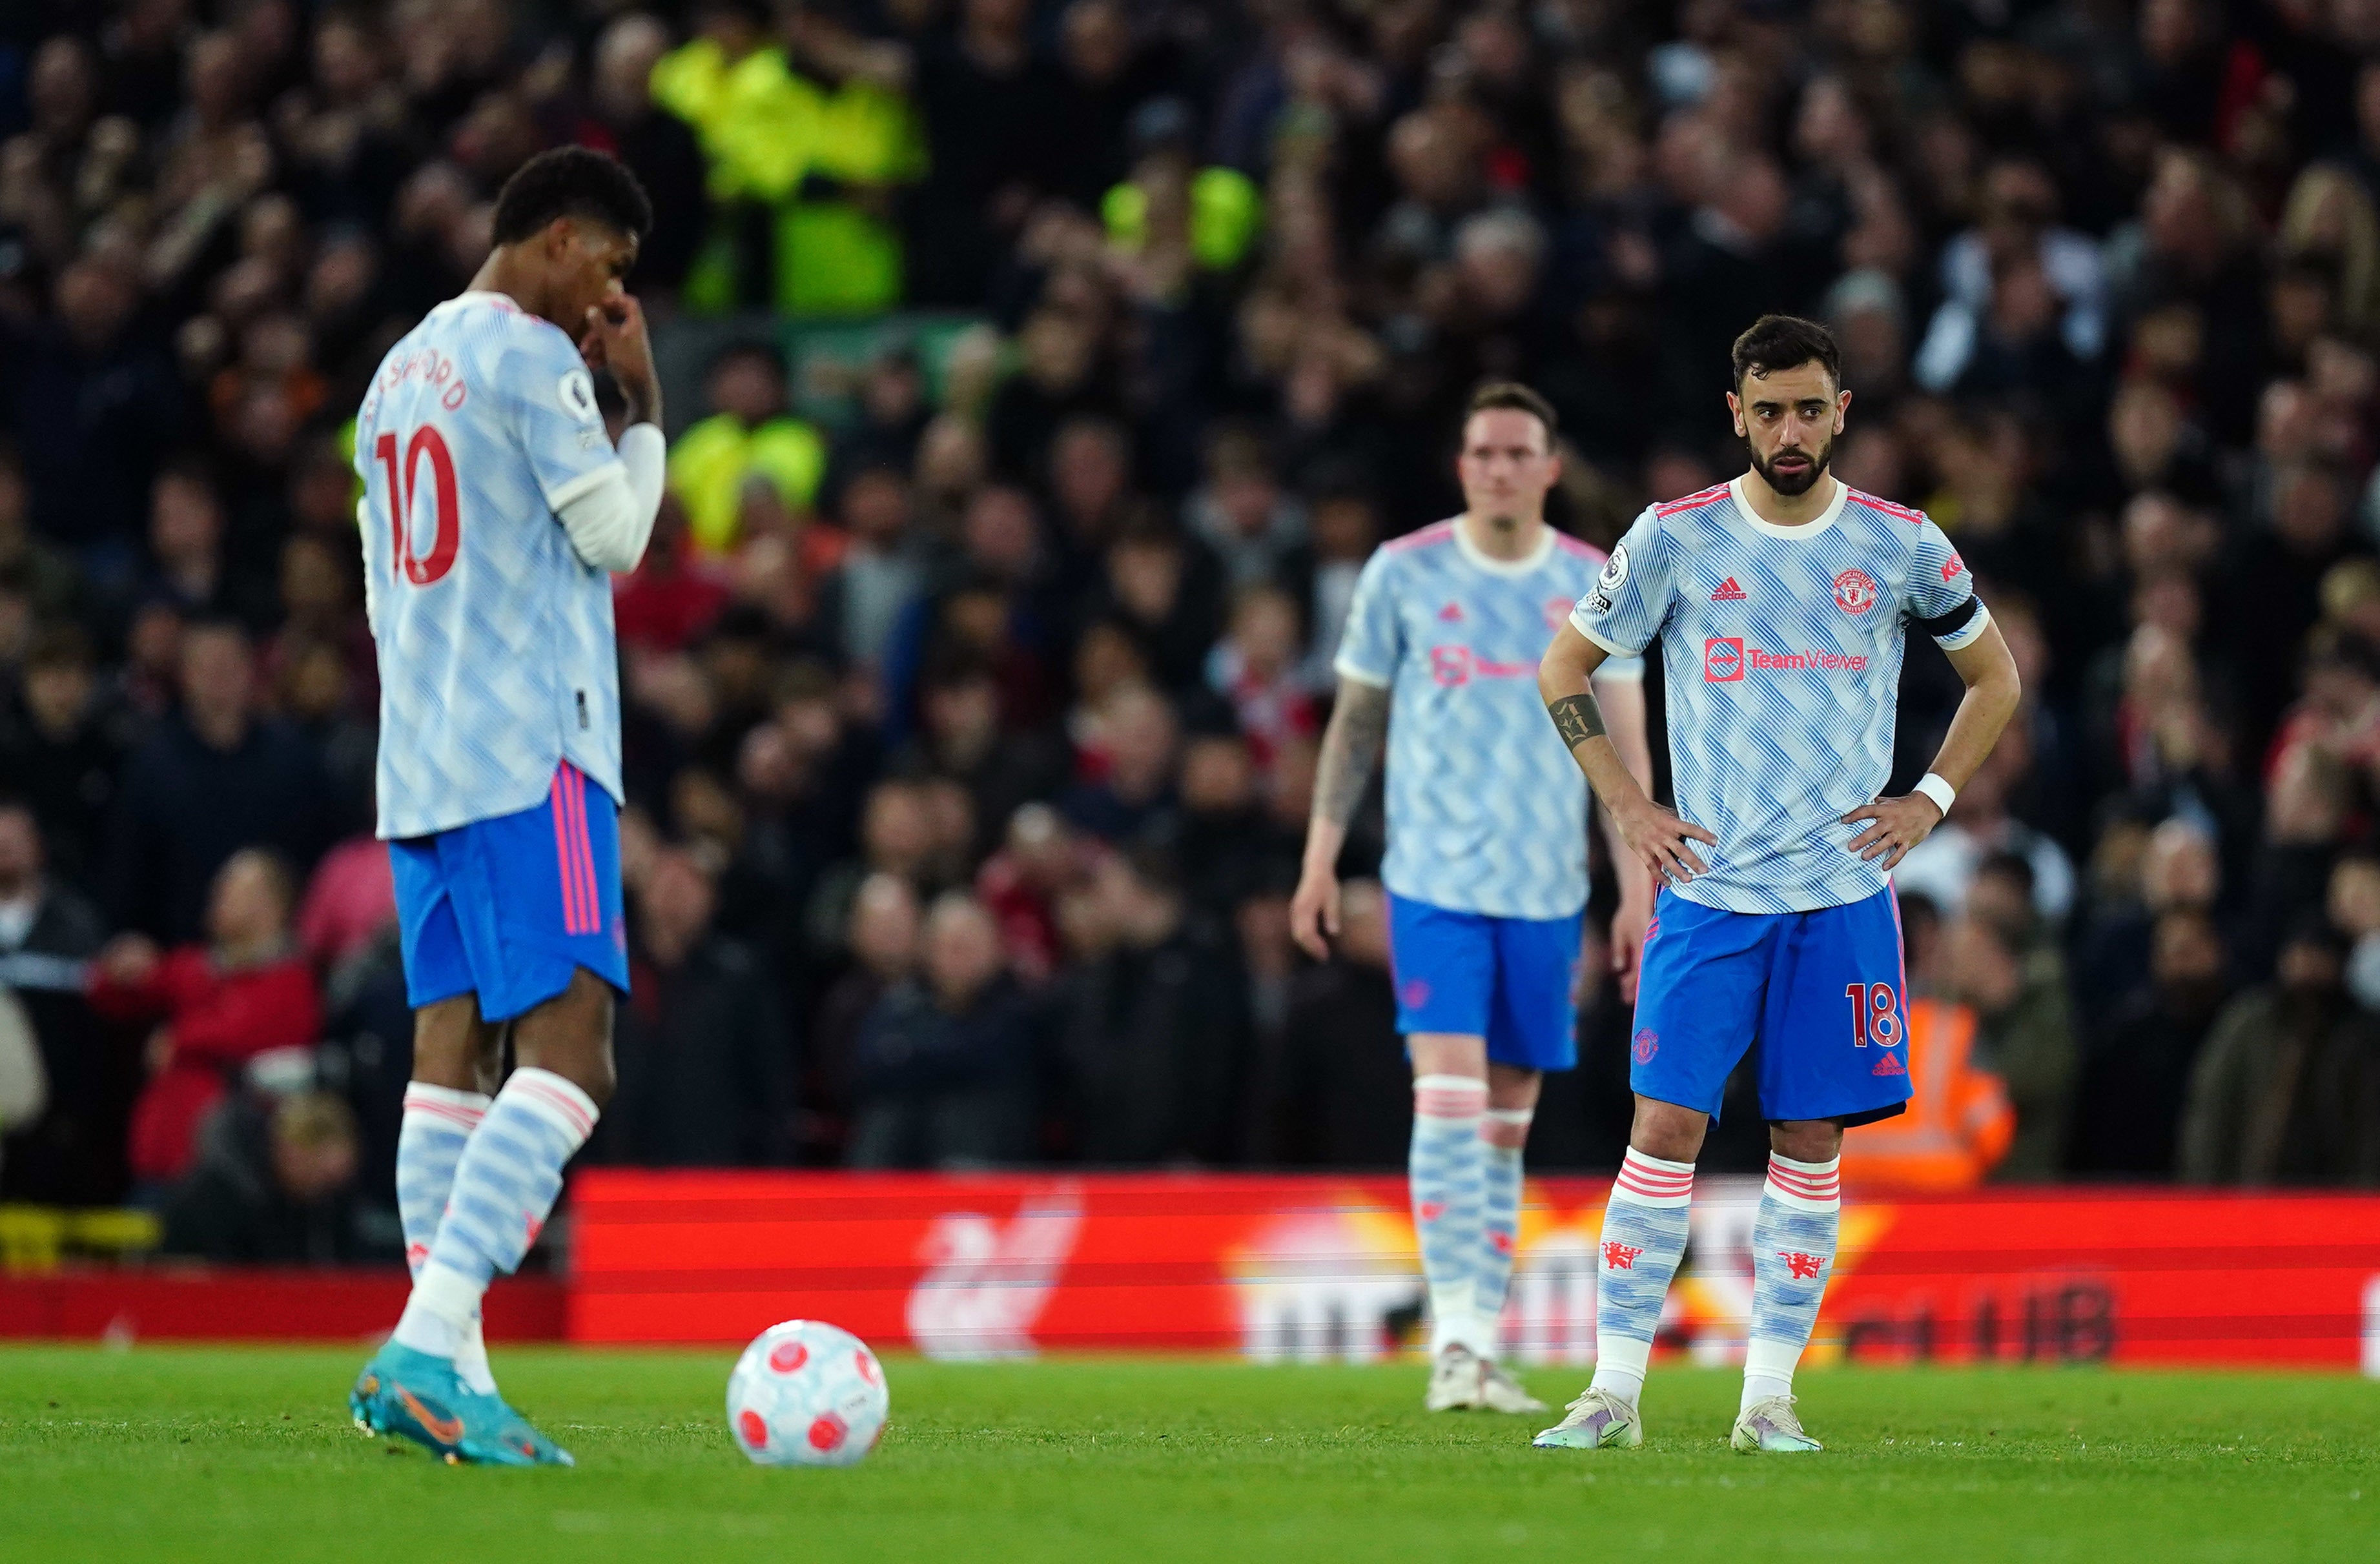 Manchester United wilted to an abject defeat at Anfield